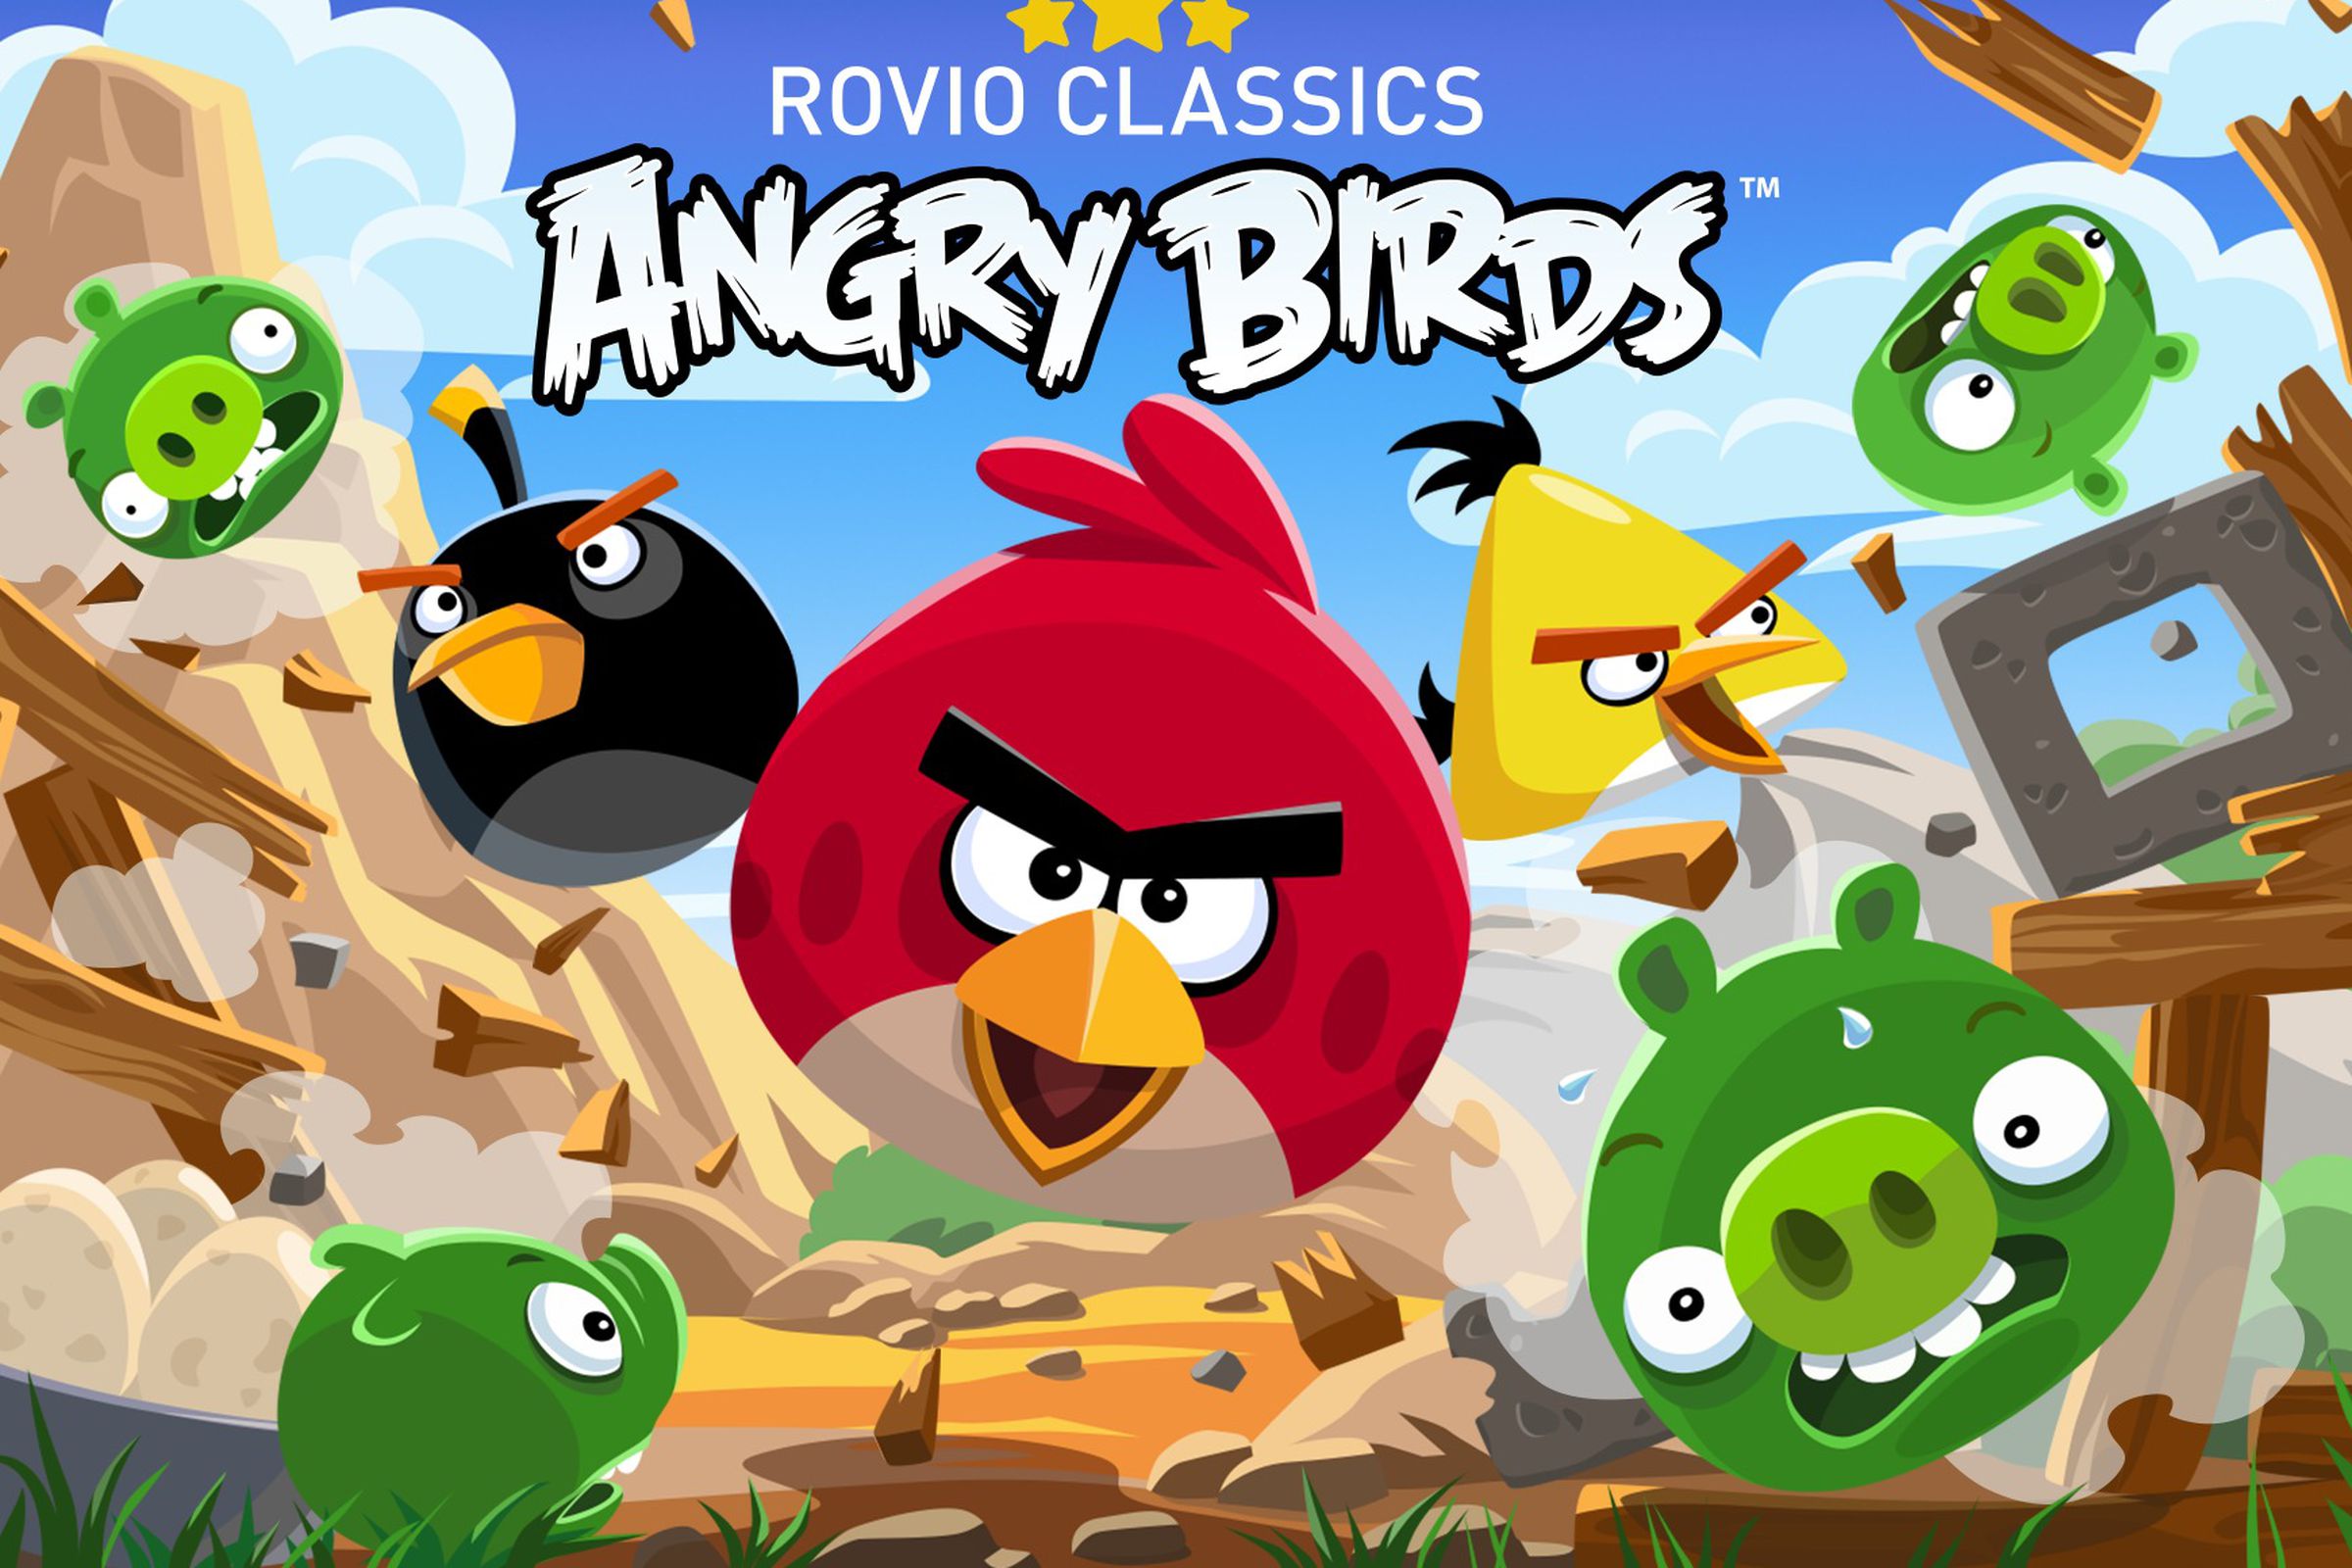 Promotional art for Rovio Classics: Angry Birds.